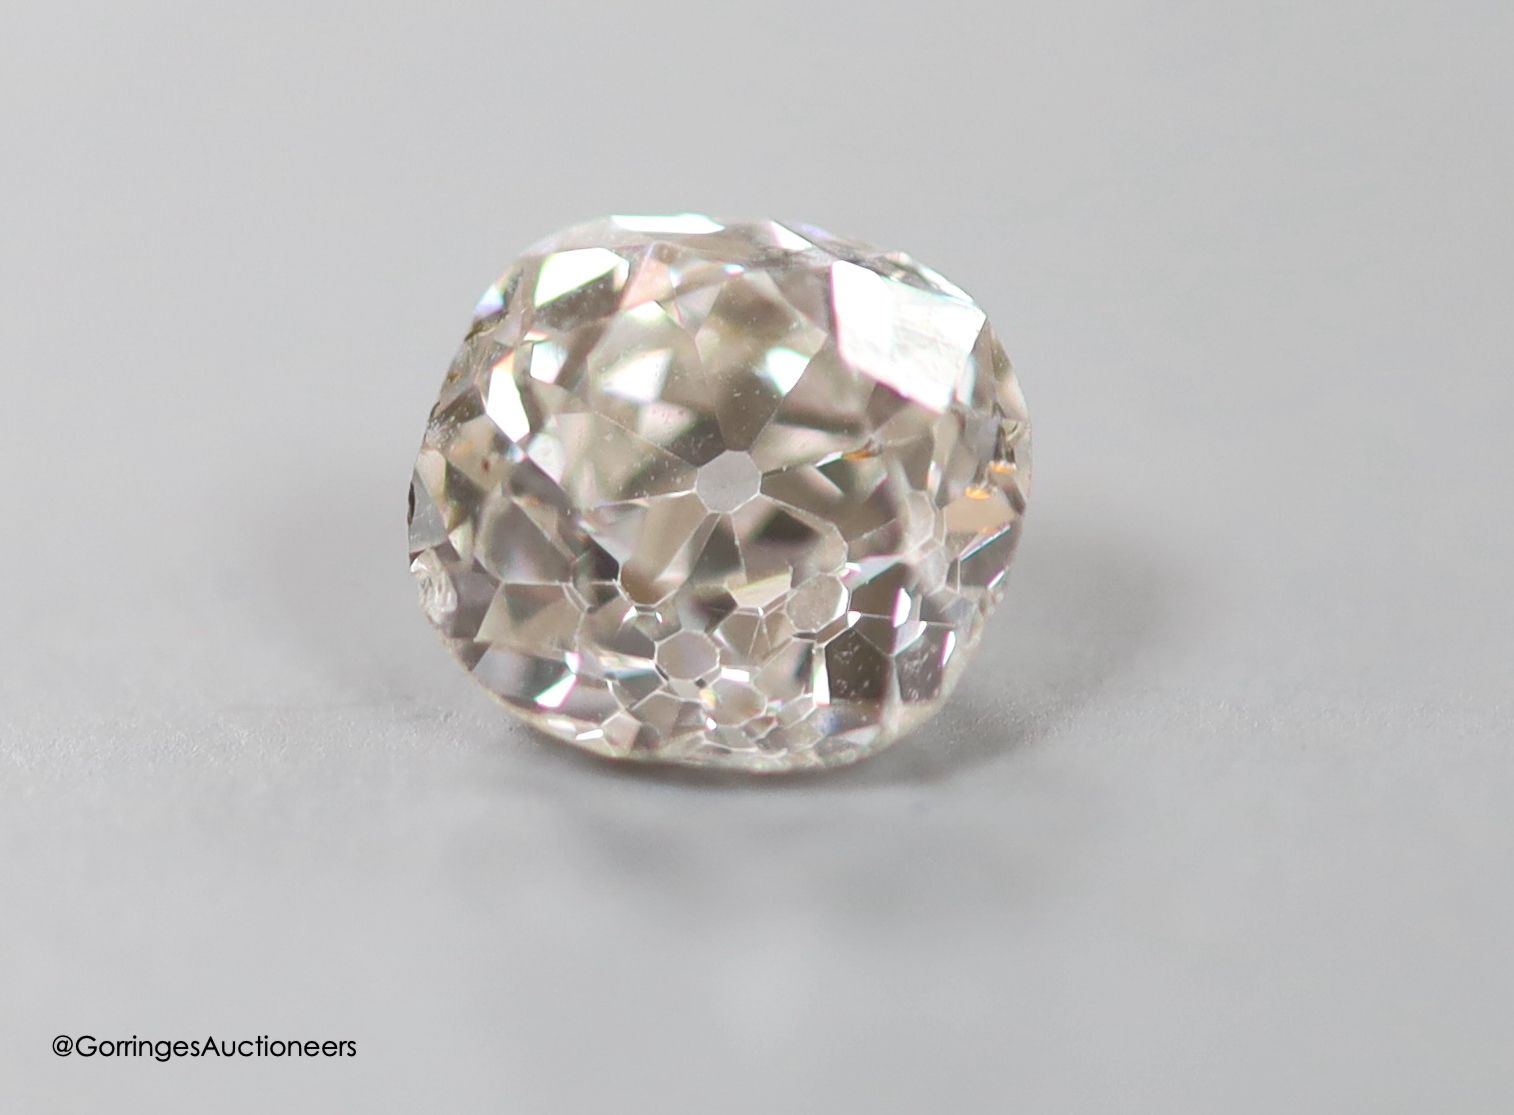 An unmounted cushion cut diamond, weighing approximately 1.10ct